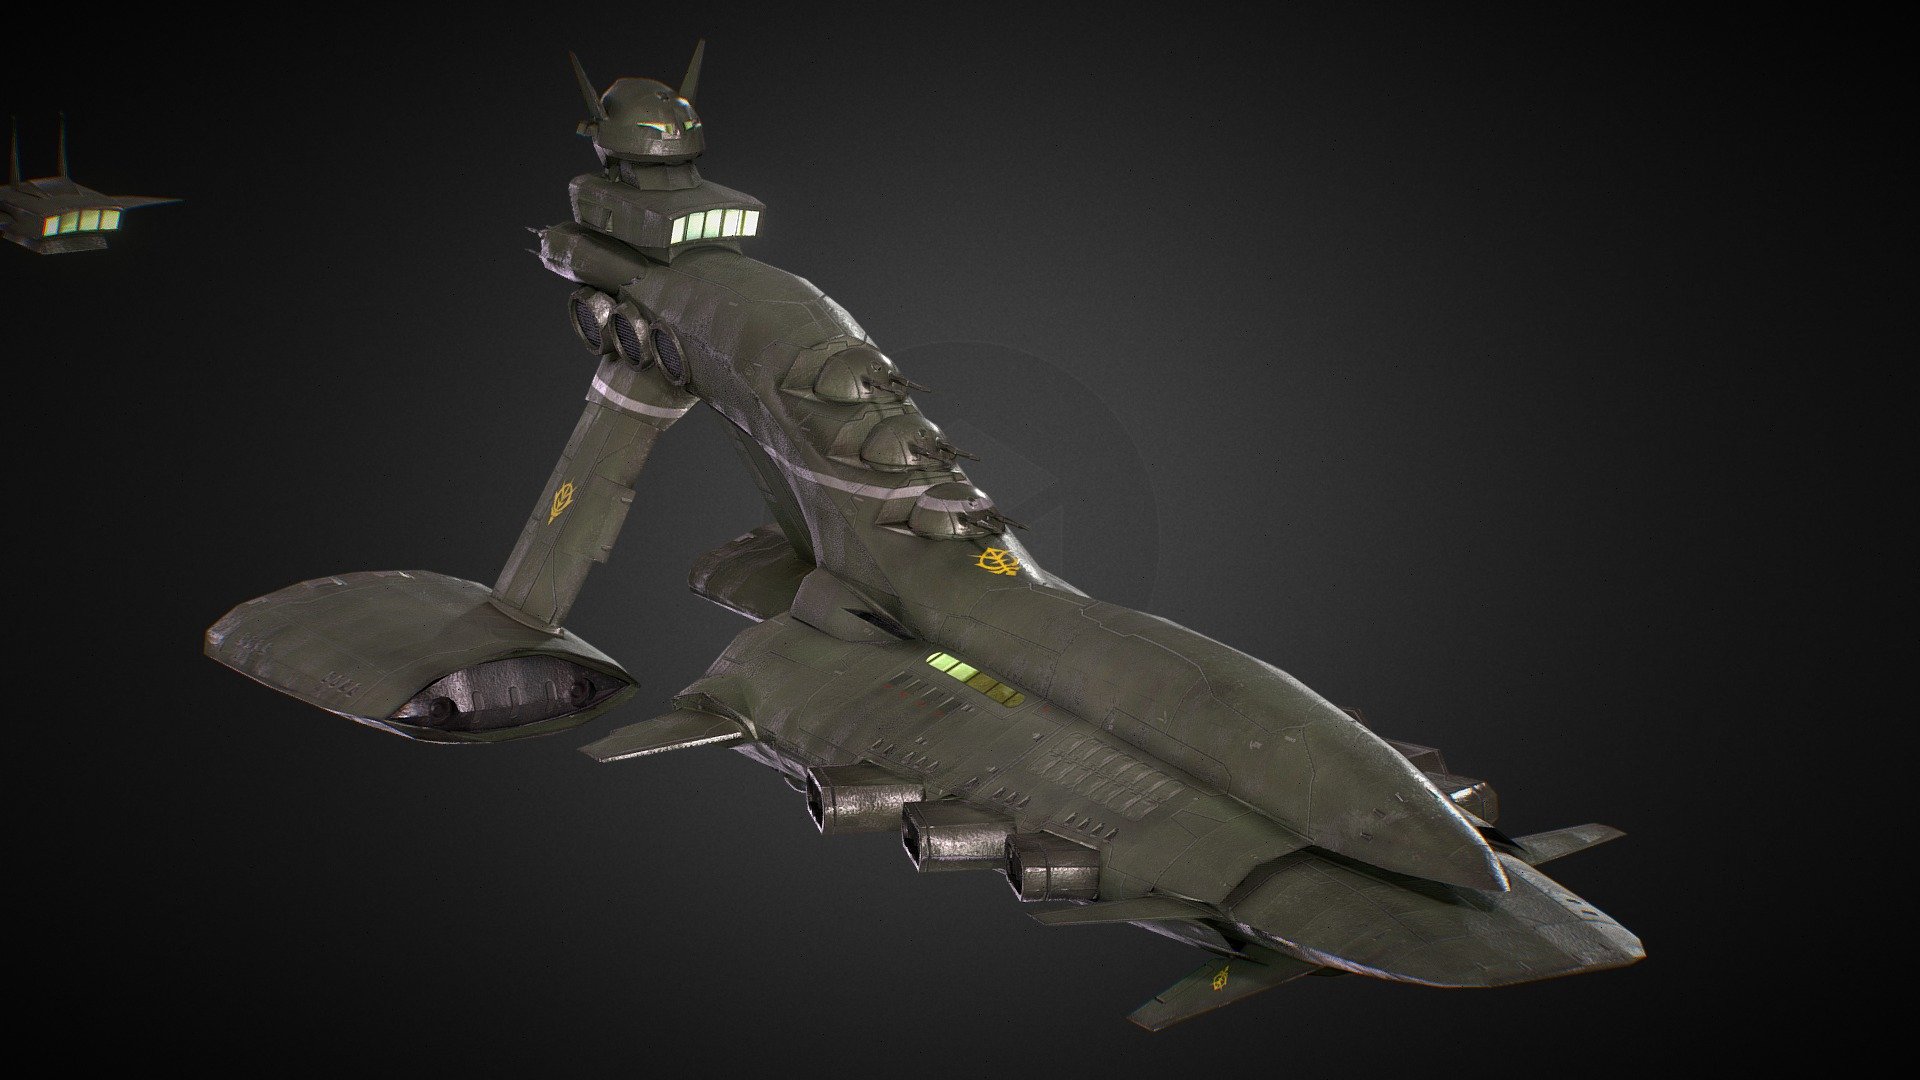 Zeon Musai Class Space light cruiser

This model was made for One Year War mod of Hearts of Iron IV.
Our Mod Steam Home Page
https://steamcommunity.com/sharedfiles/filedetails/?id=2064985570 - Zeon Musai Class Space light cruiser - 3D model by One Year War Mod (@hoi4oneyearwar) 3d model